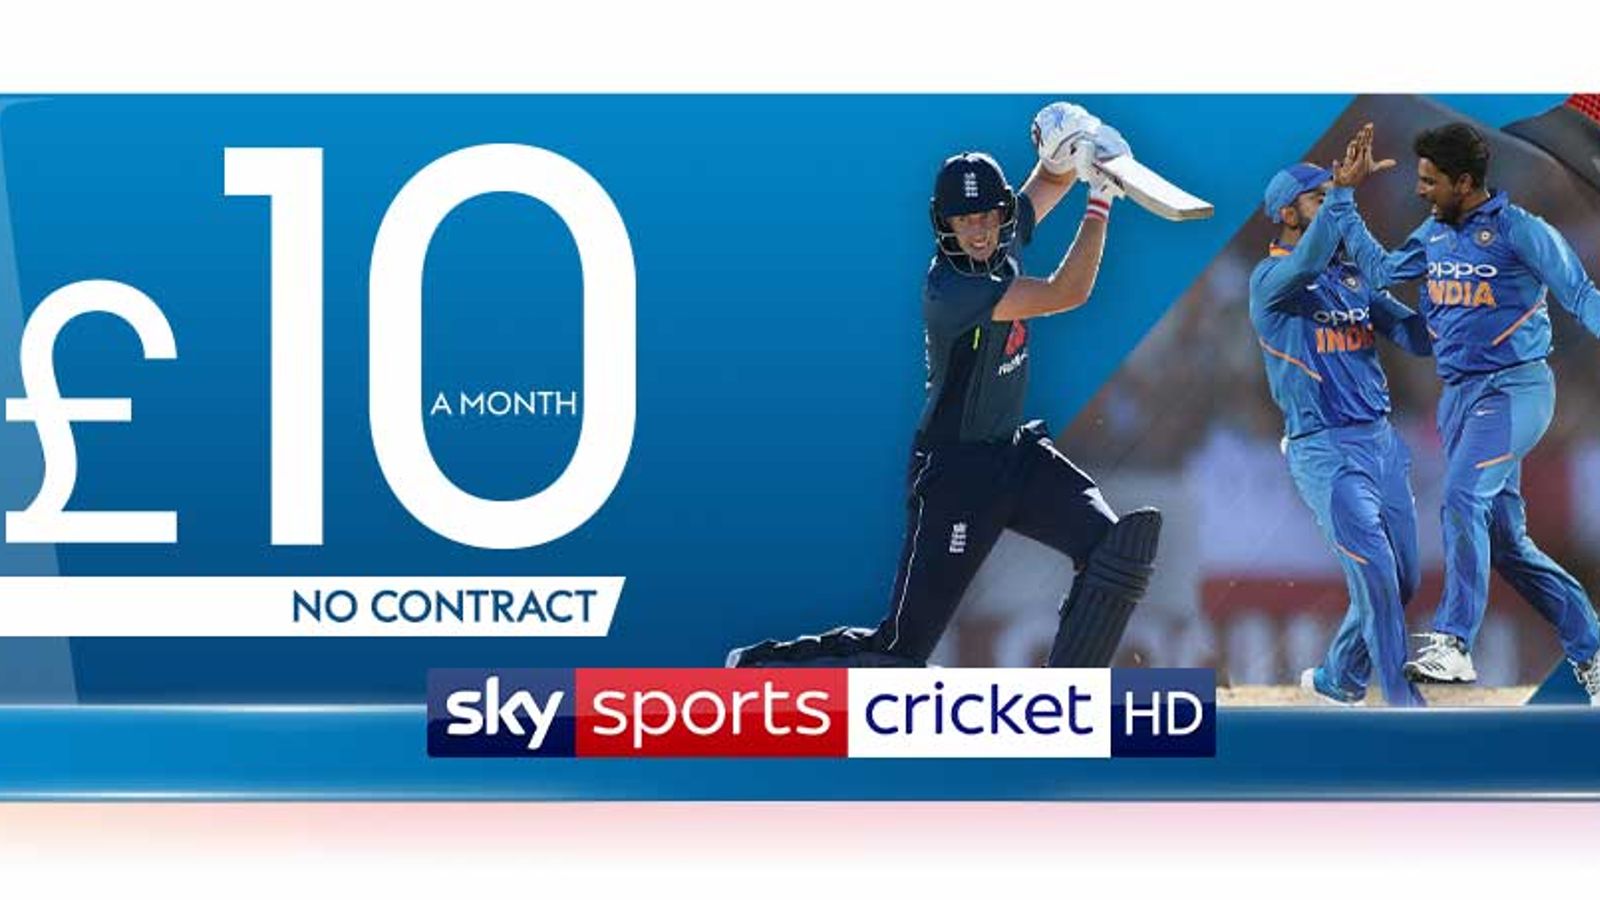 Cricket World Cup Get Sky Sports Cricket HD for just £10 a month